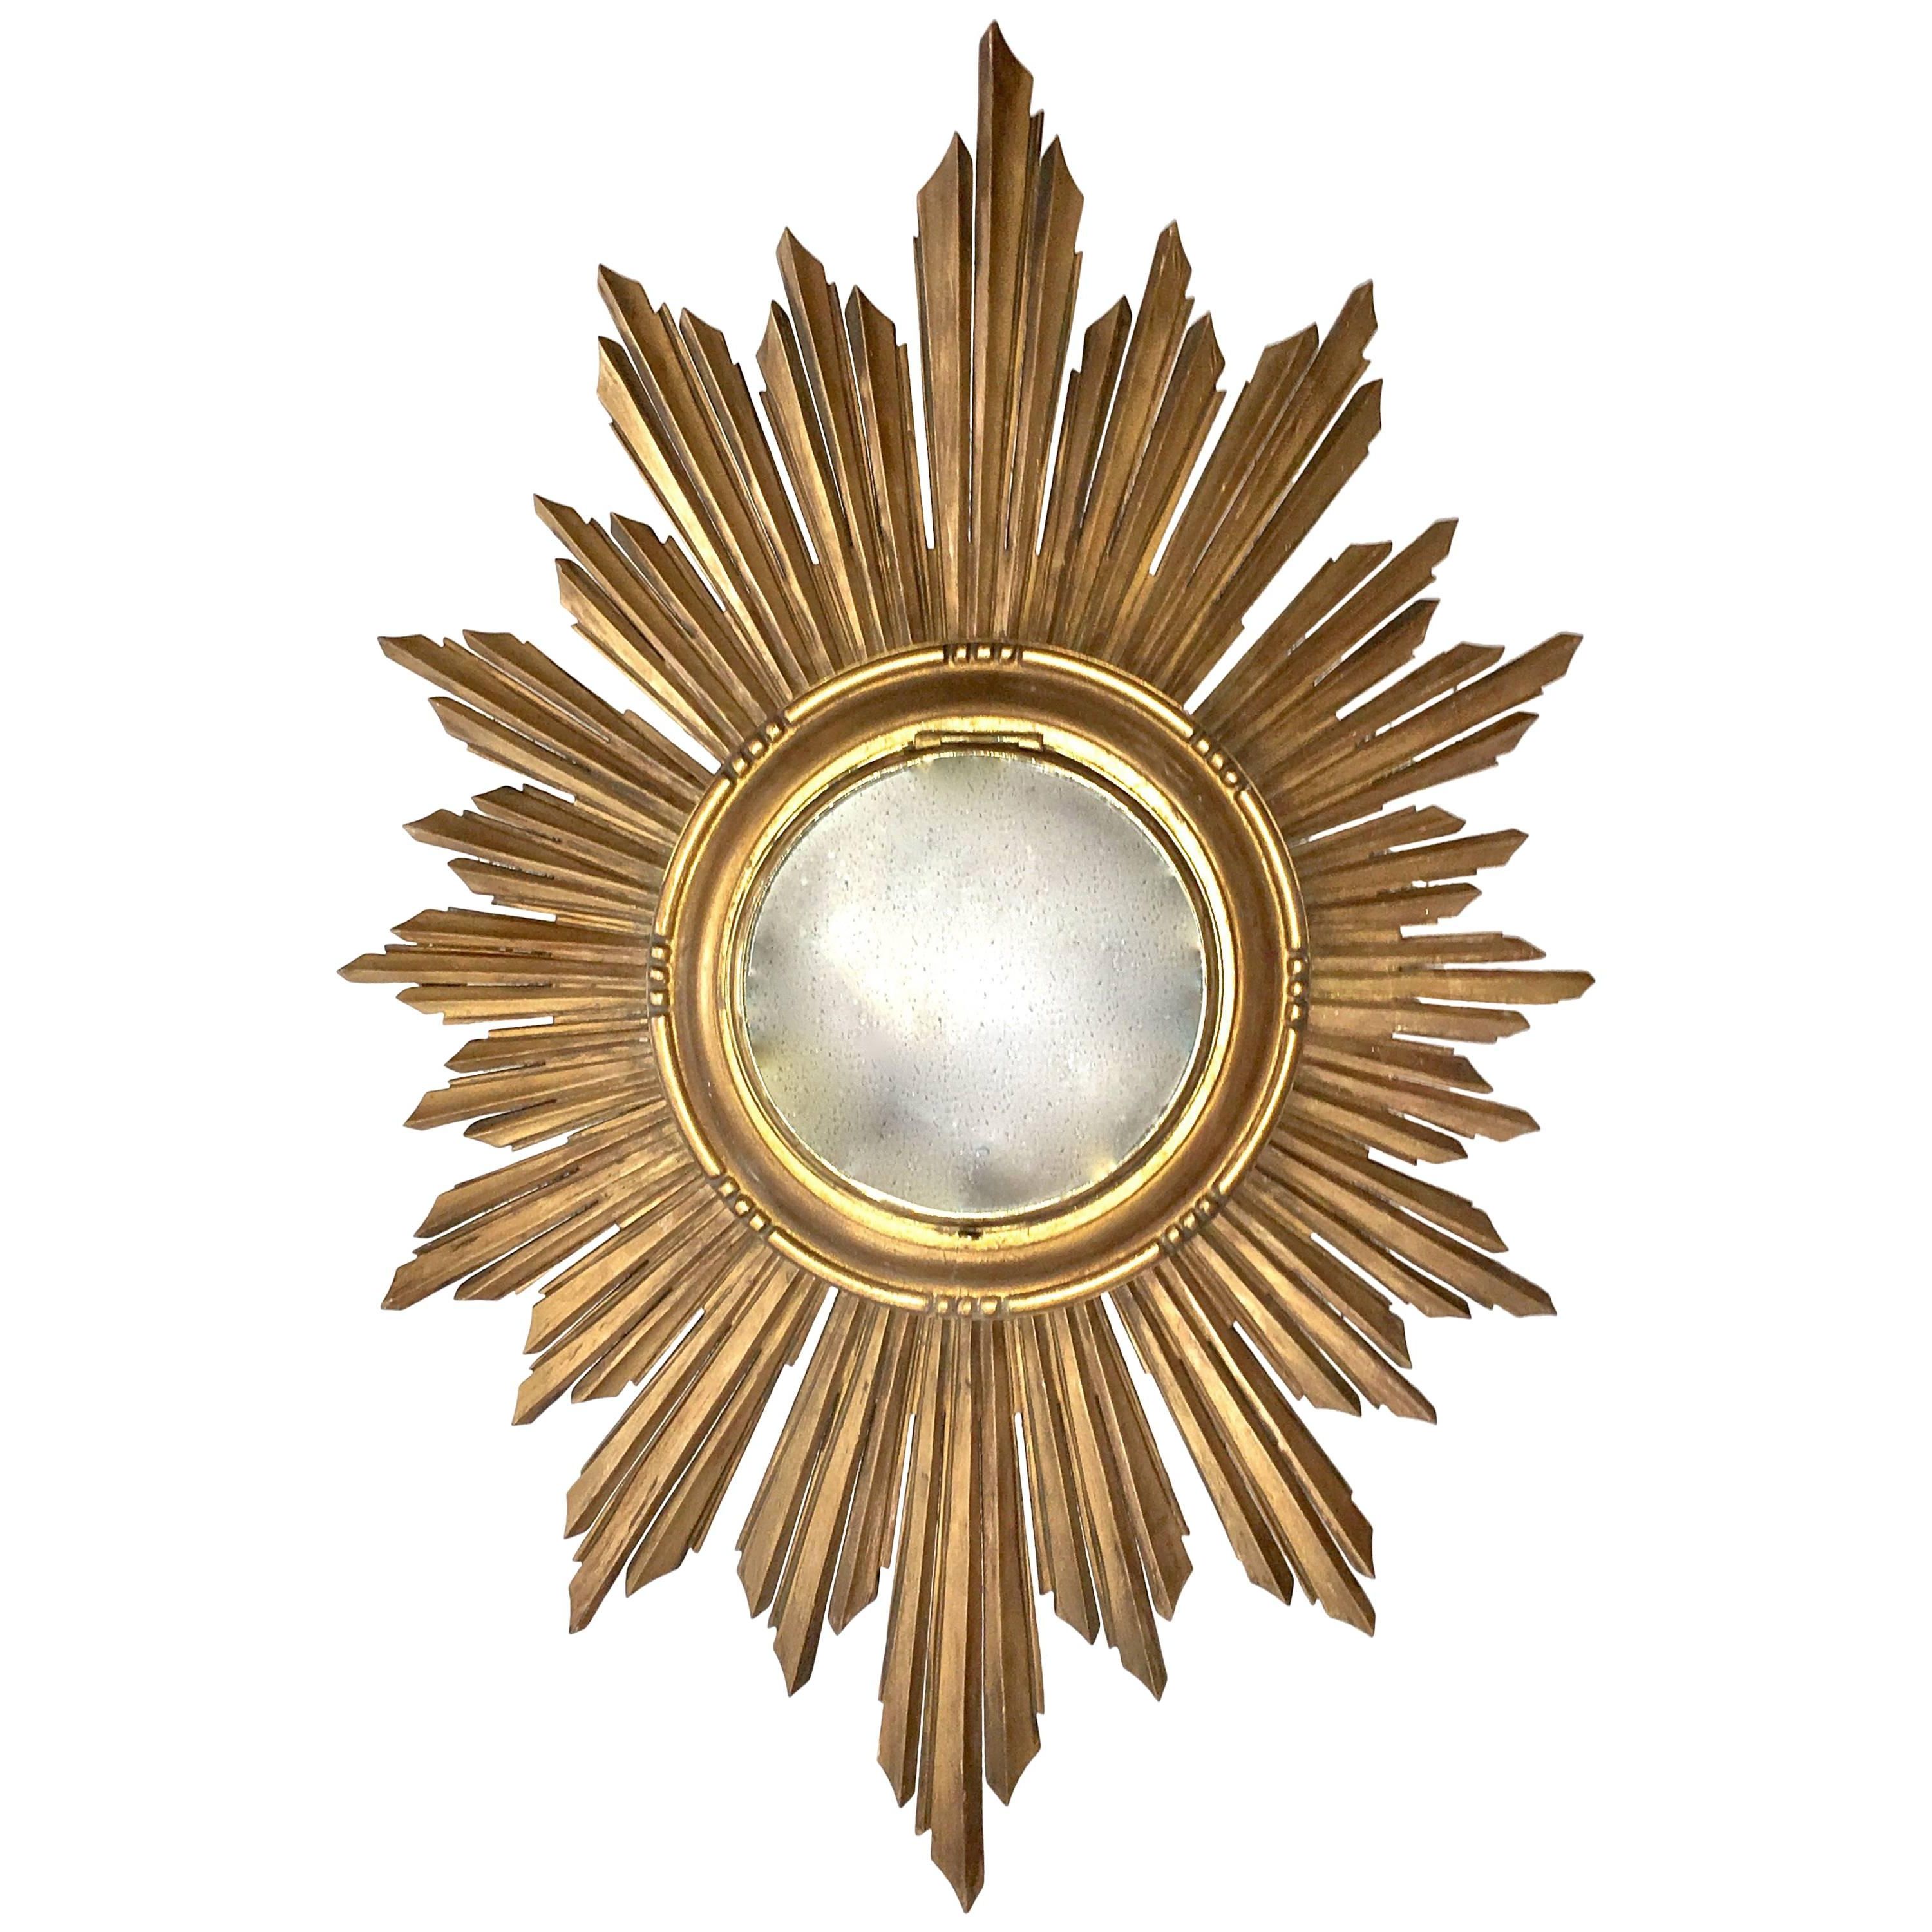 Popular French Soleil Sunburst Giltwood Carved Wall Mirror Pertaining To Soleil Wall Mirrors (View 7 of 20)